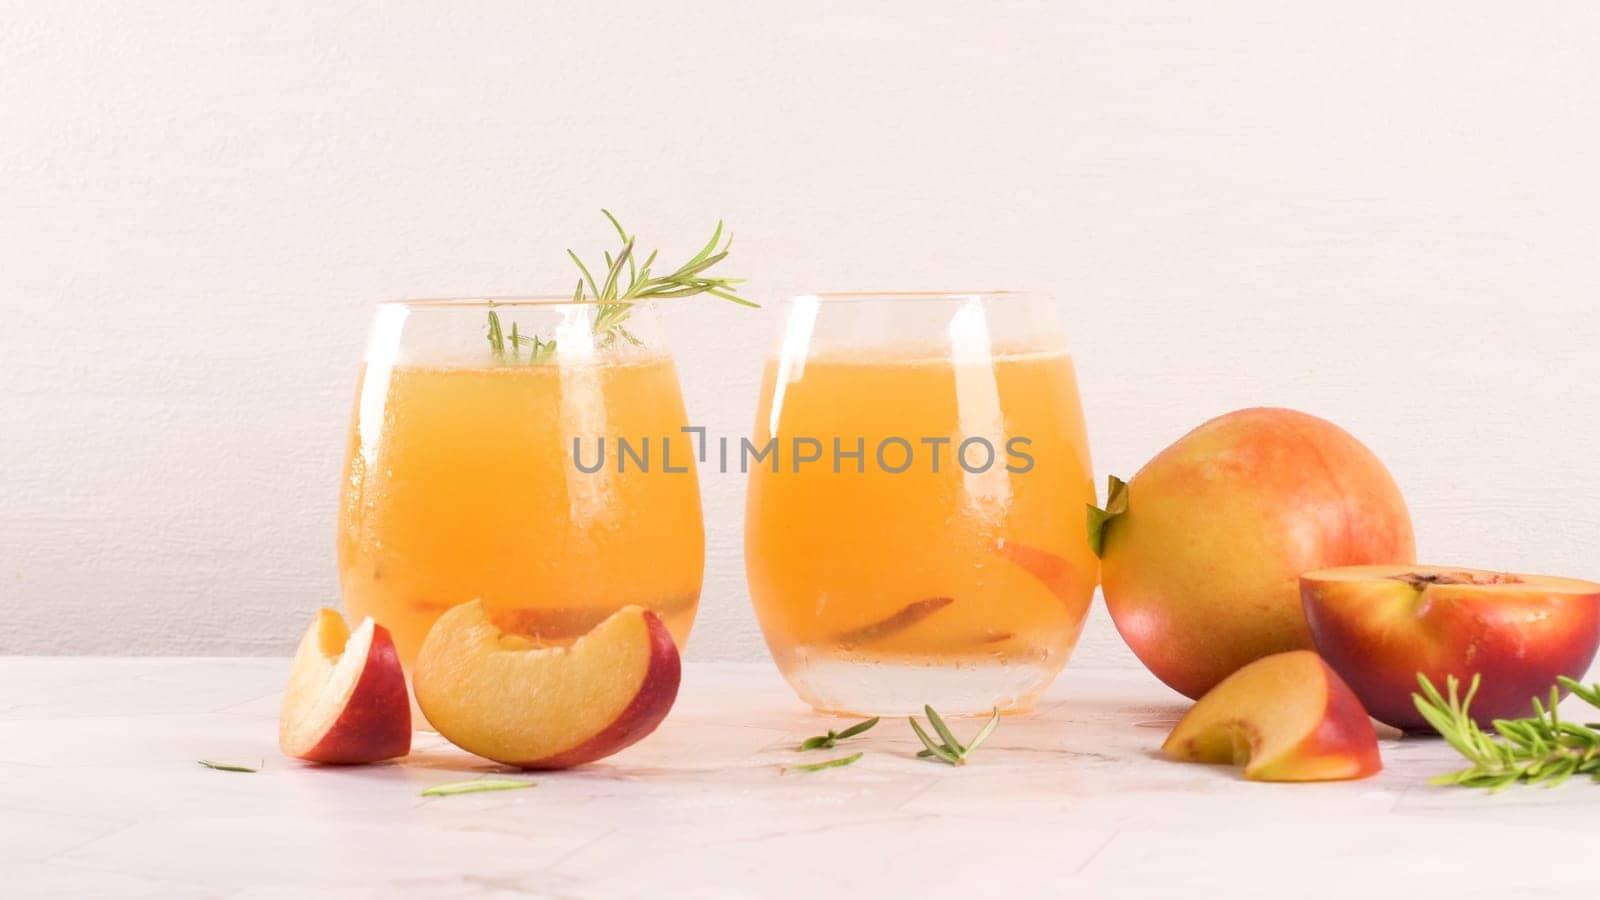 Homemade peach juice with ice cubes and rosemary leaves in glass on marble stone background.